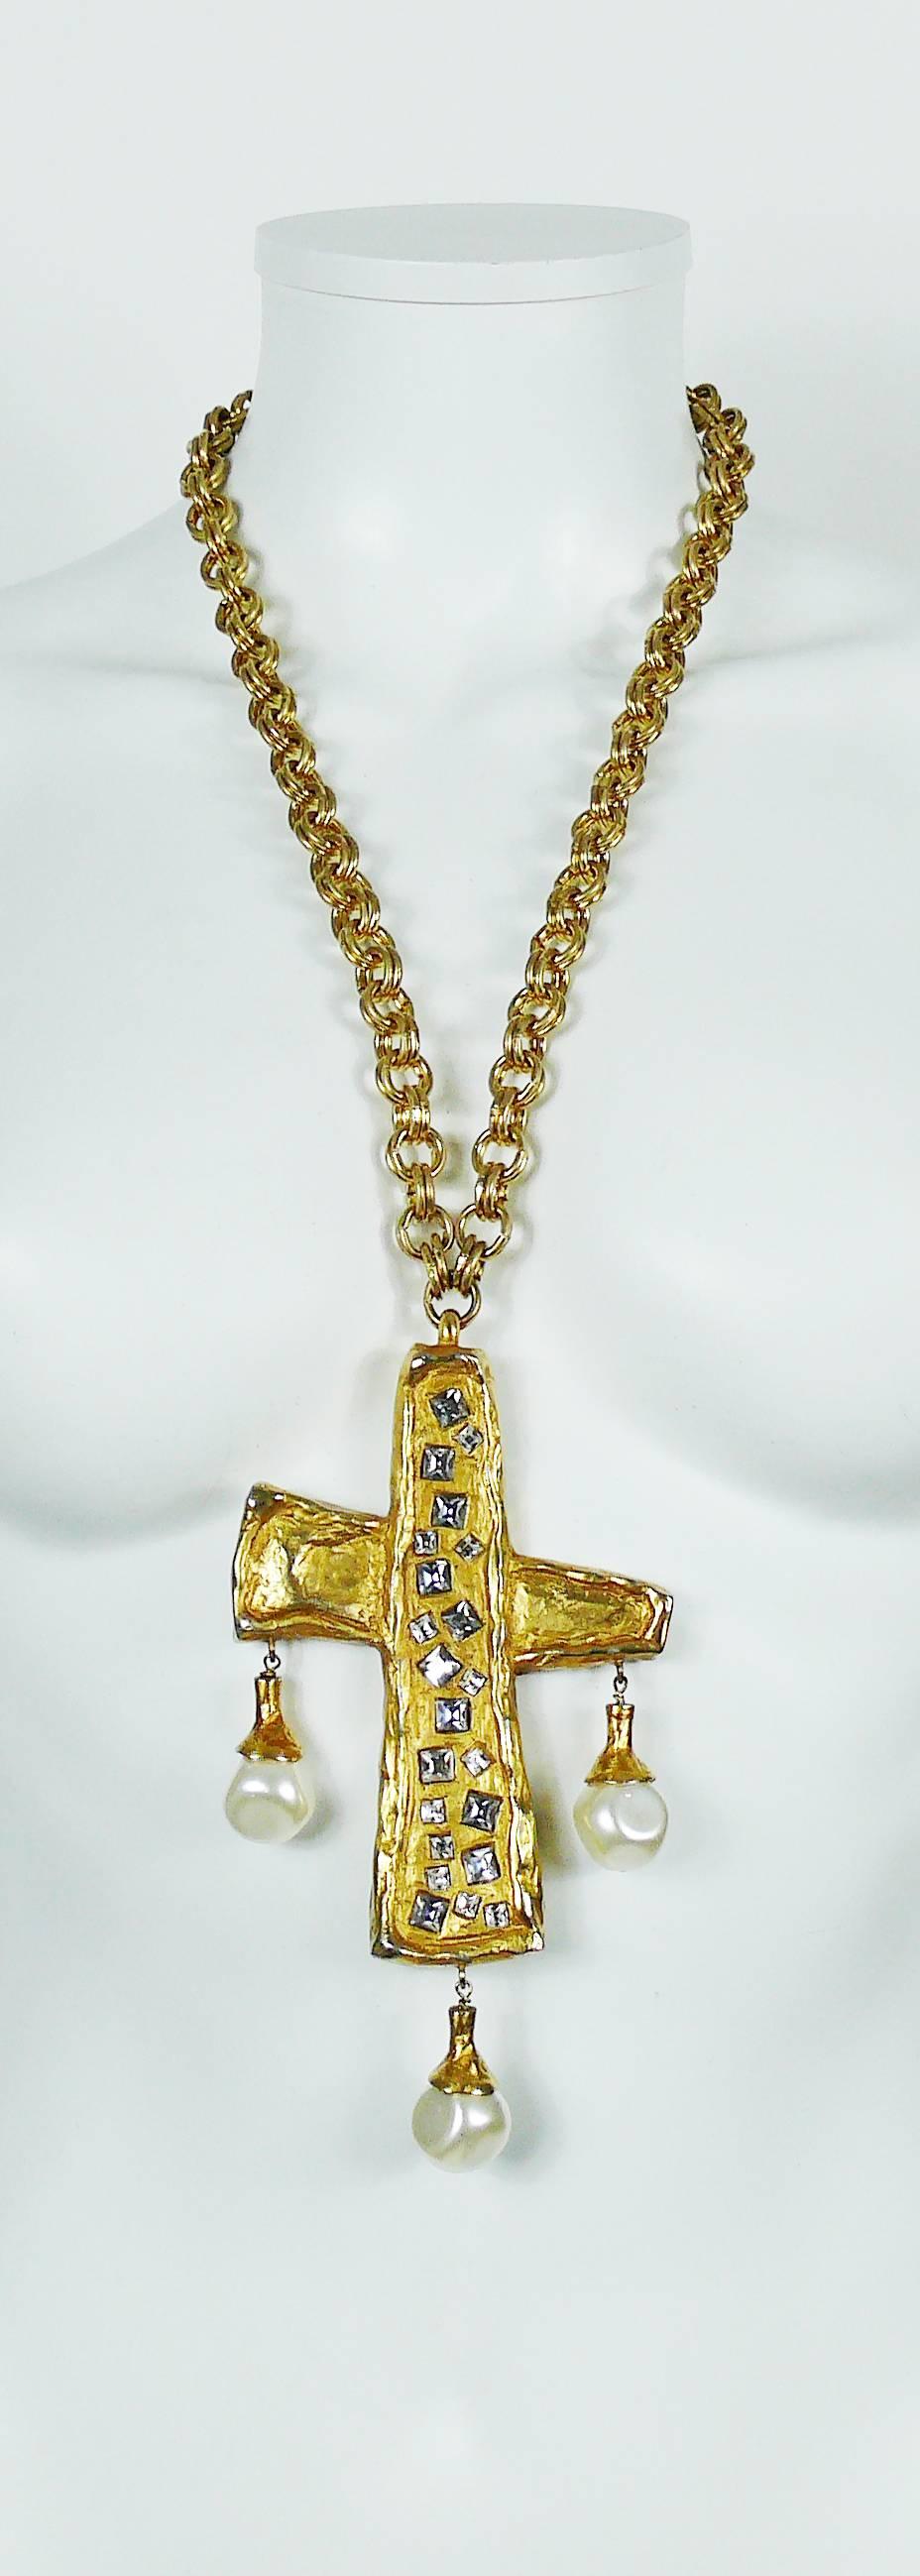 CHRISTIAN LACROIX vintage rare antiqued gold tone necklace featuring a massive chain and a huge textured cross embellished with clear crystal and glass pearl drops.

Marked CHRISTIAN LACROIX CL Made in France.

Indicative measurements : chain length